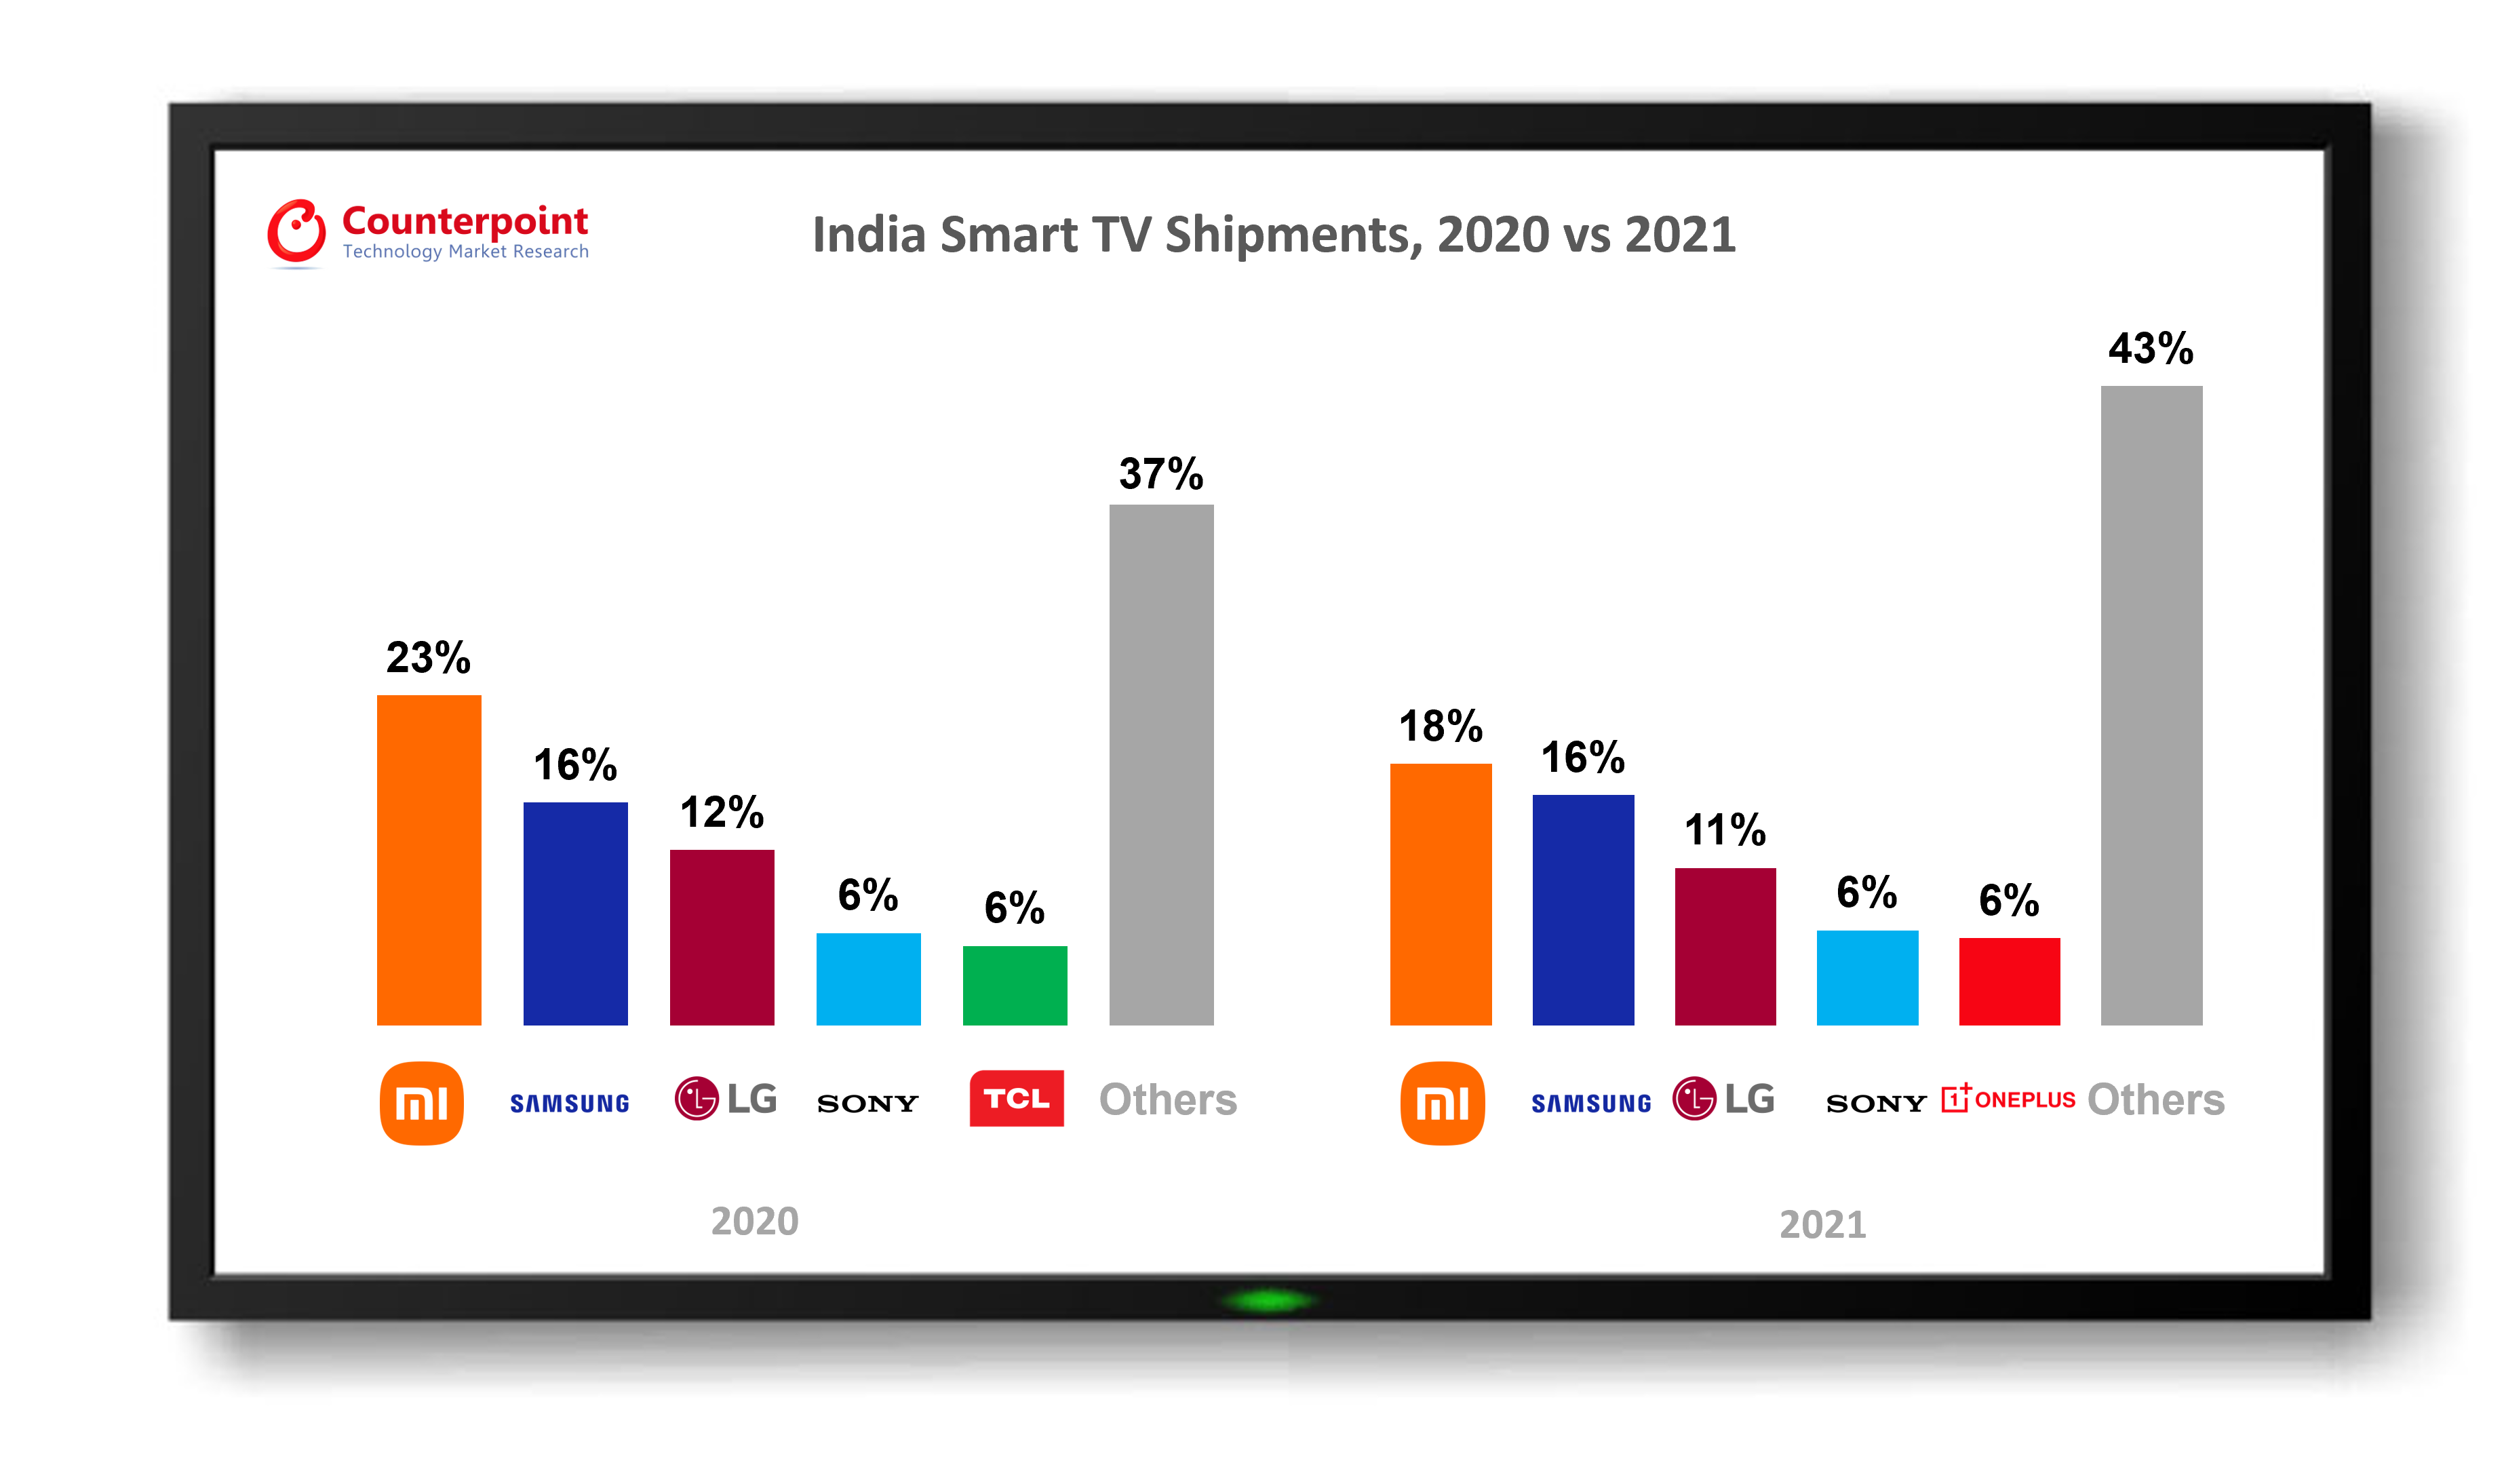 Counterpoint Research: India Smart TV Market Share of Top 5 Brands - 2020 vs 2021